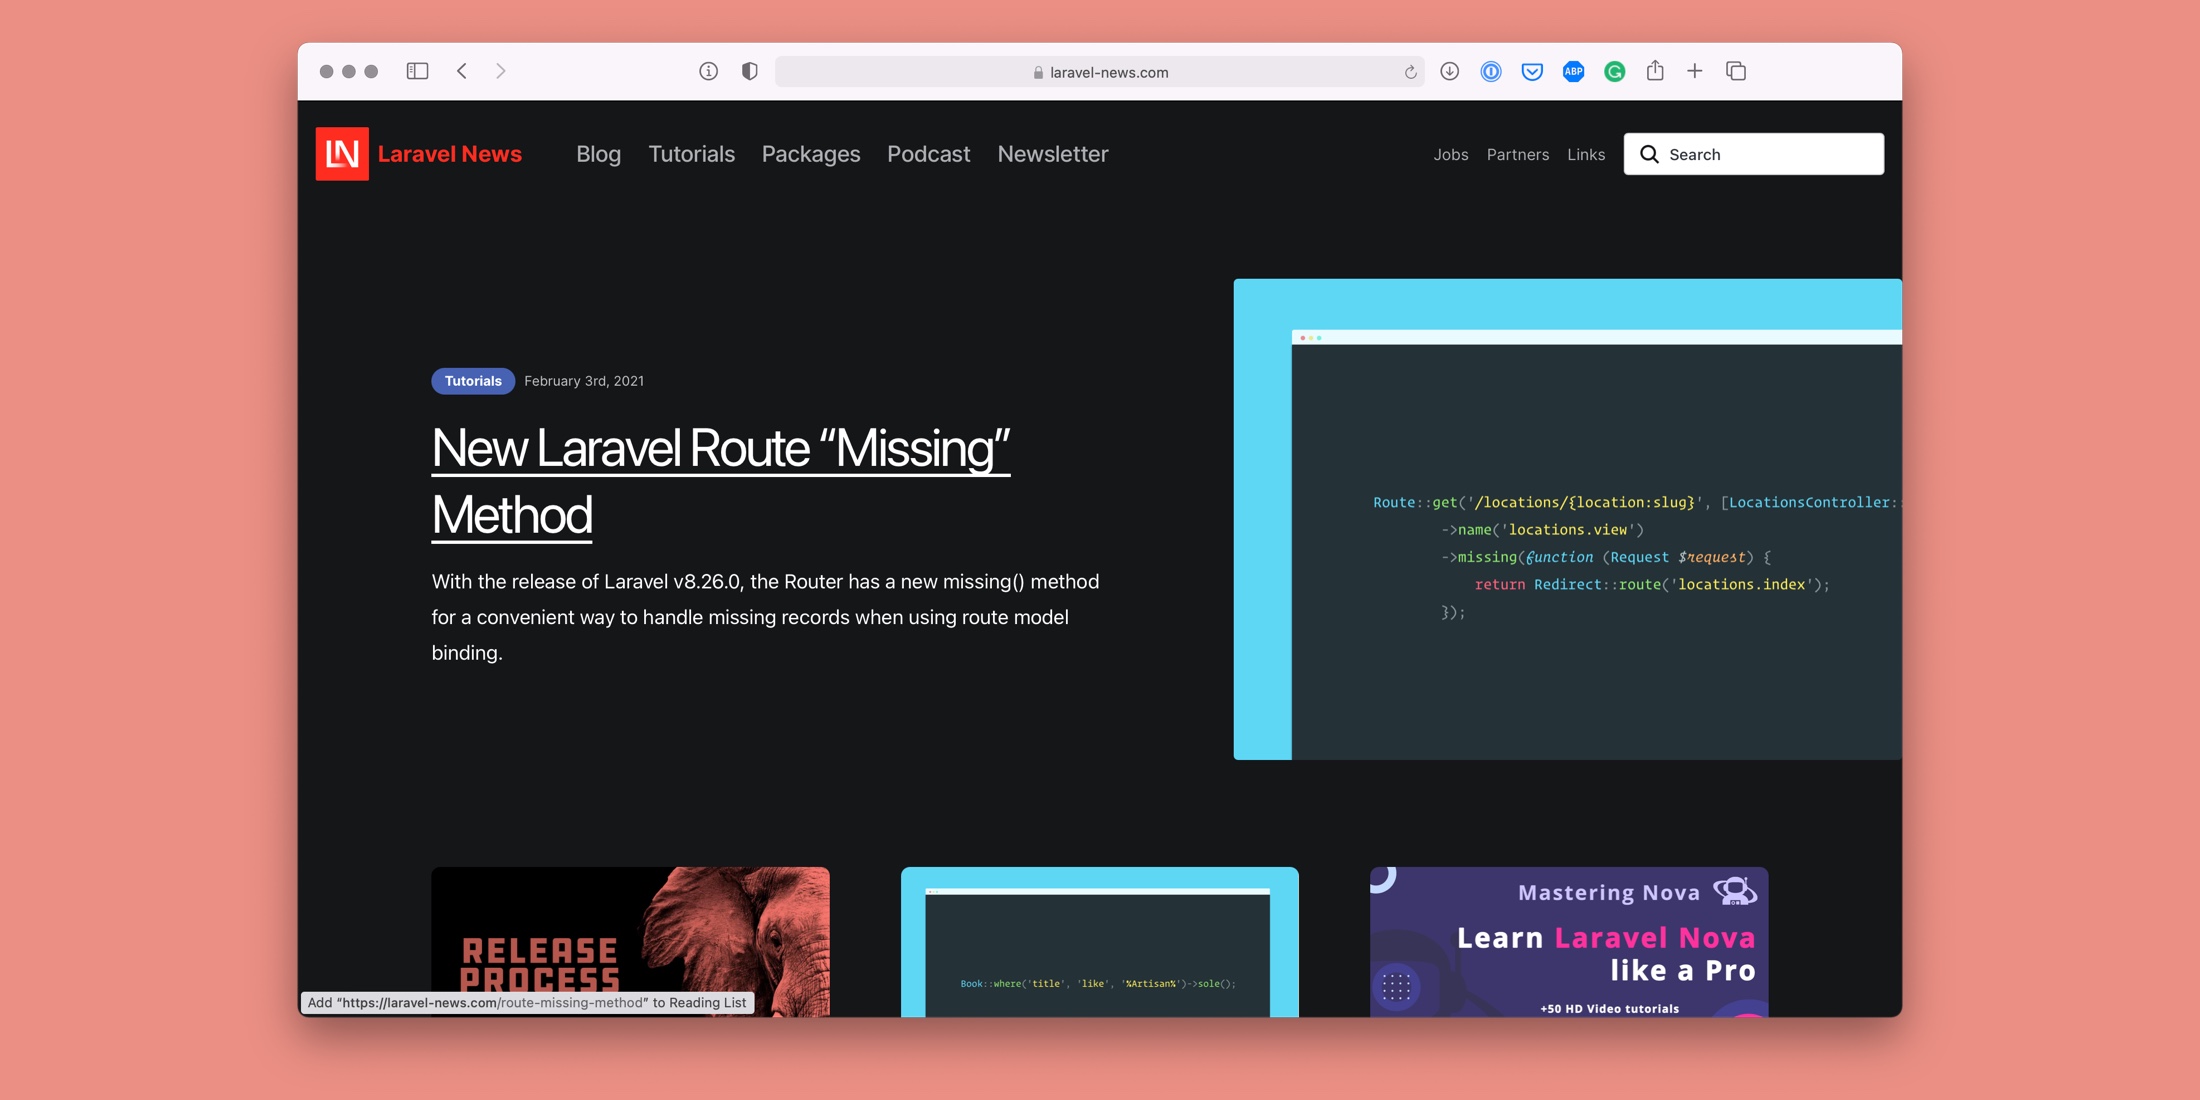 Welcome to the new Laravel News image